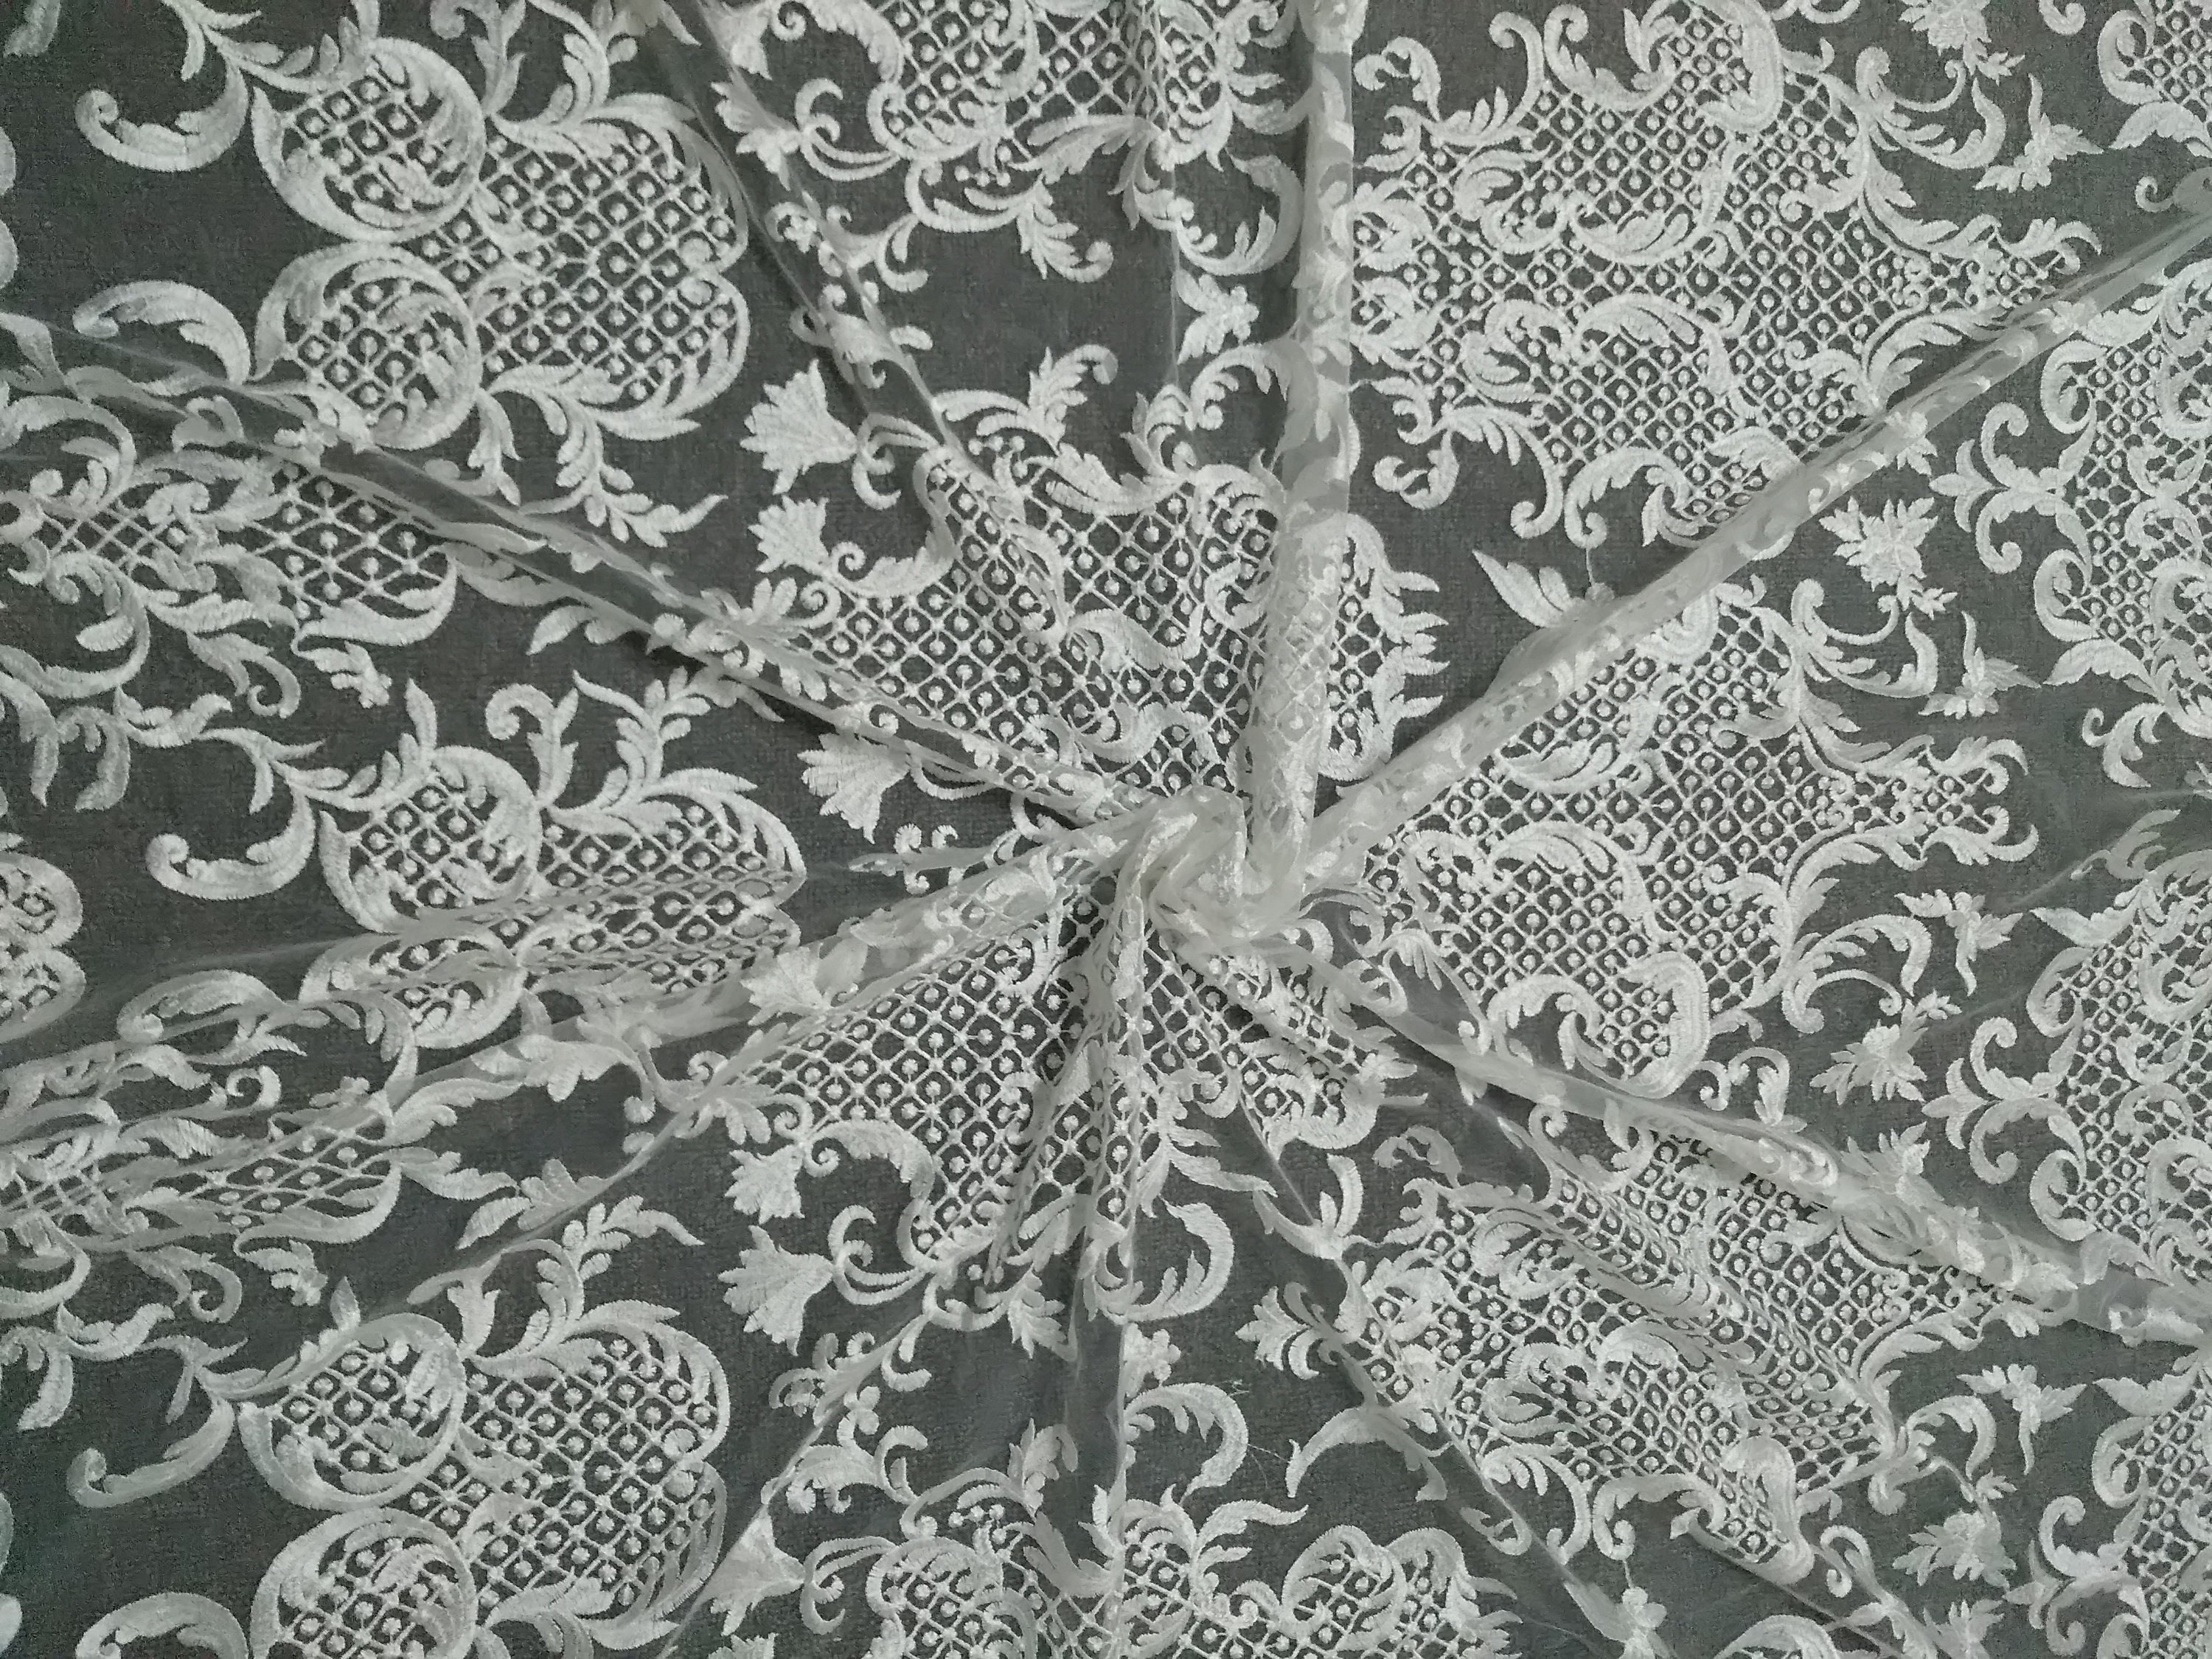 Bridal lace fabric 51'' width guipure lace fabric | Etsy